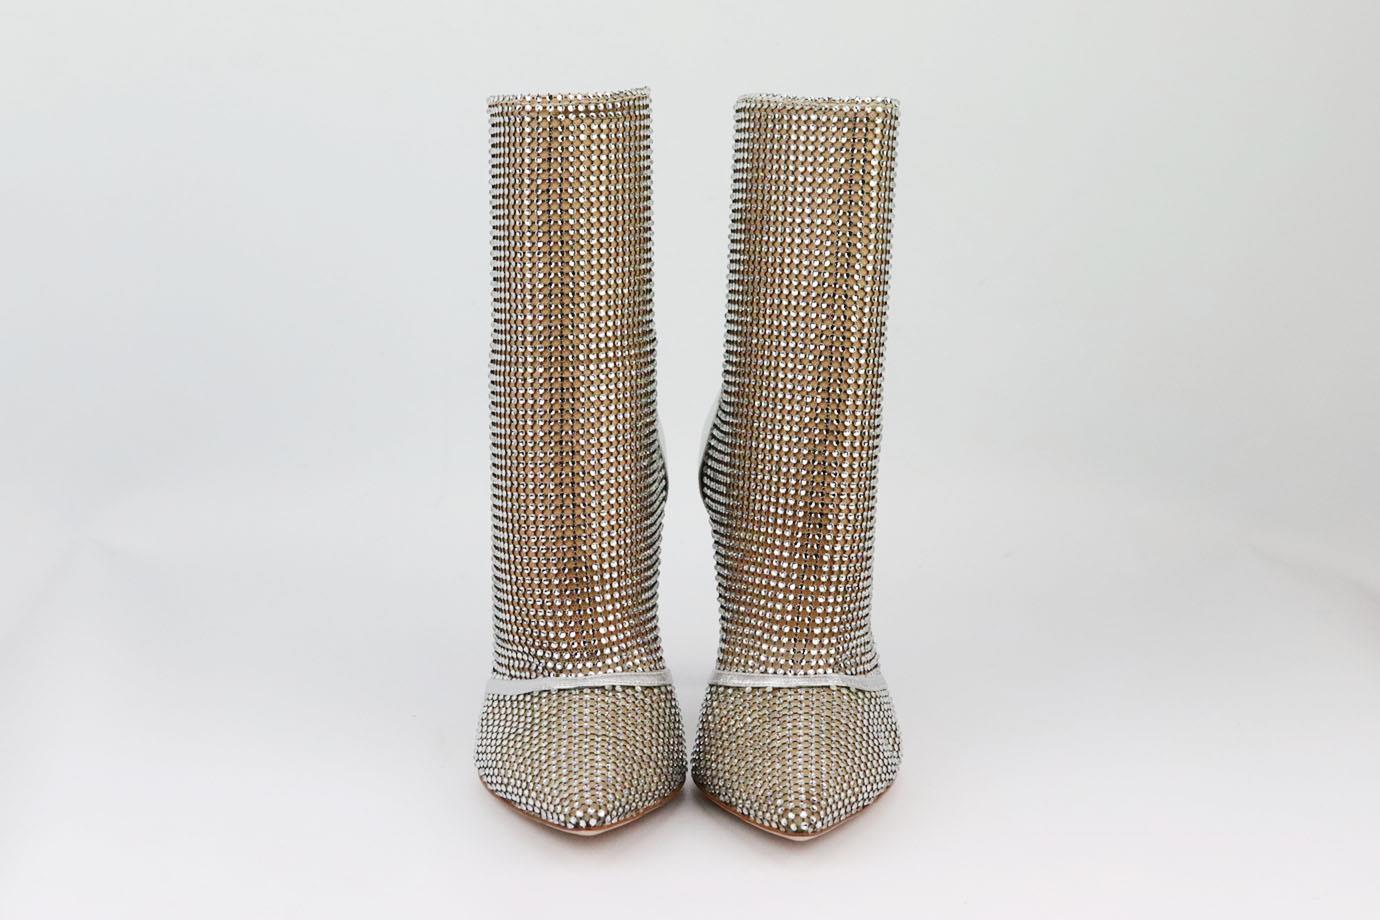 These crystal-embellished ankle boots by Gianvito Rossi are made in a sleek point-toe silhouette, they're soaked in tiny crystals and accented by silver leather, they sparkle at every angle, so you'll look especially glamorous under flashing lights.